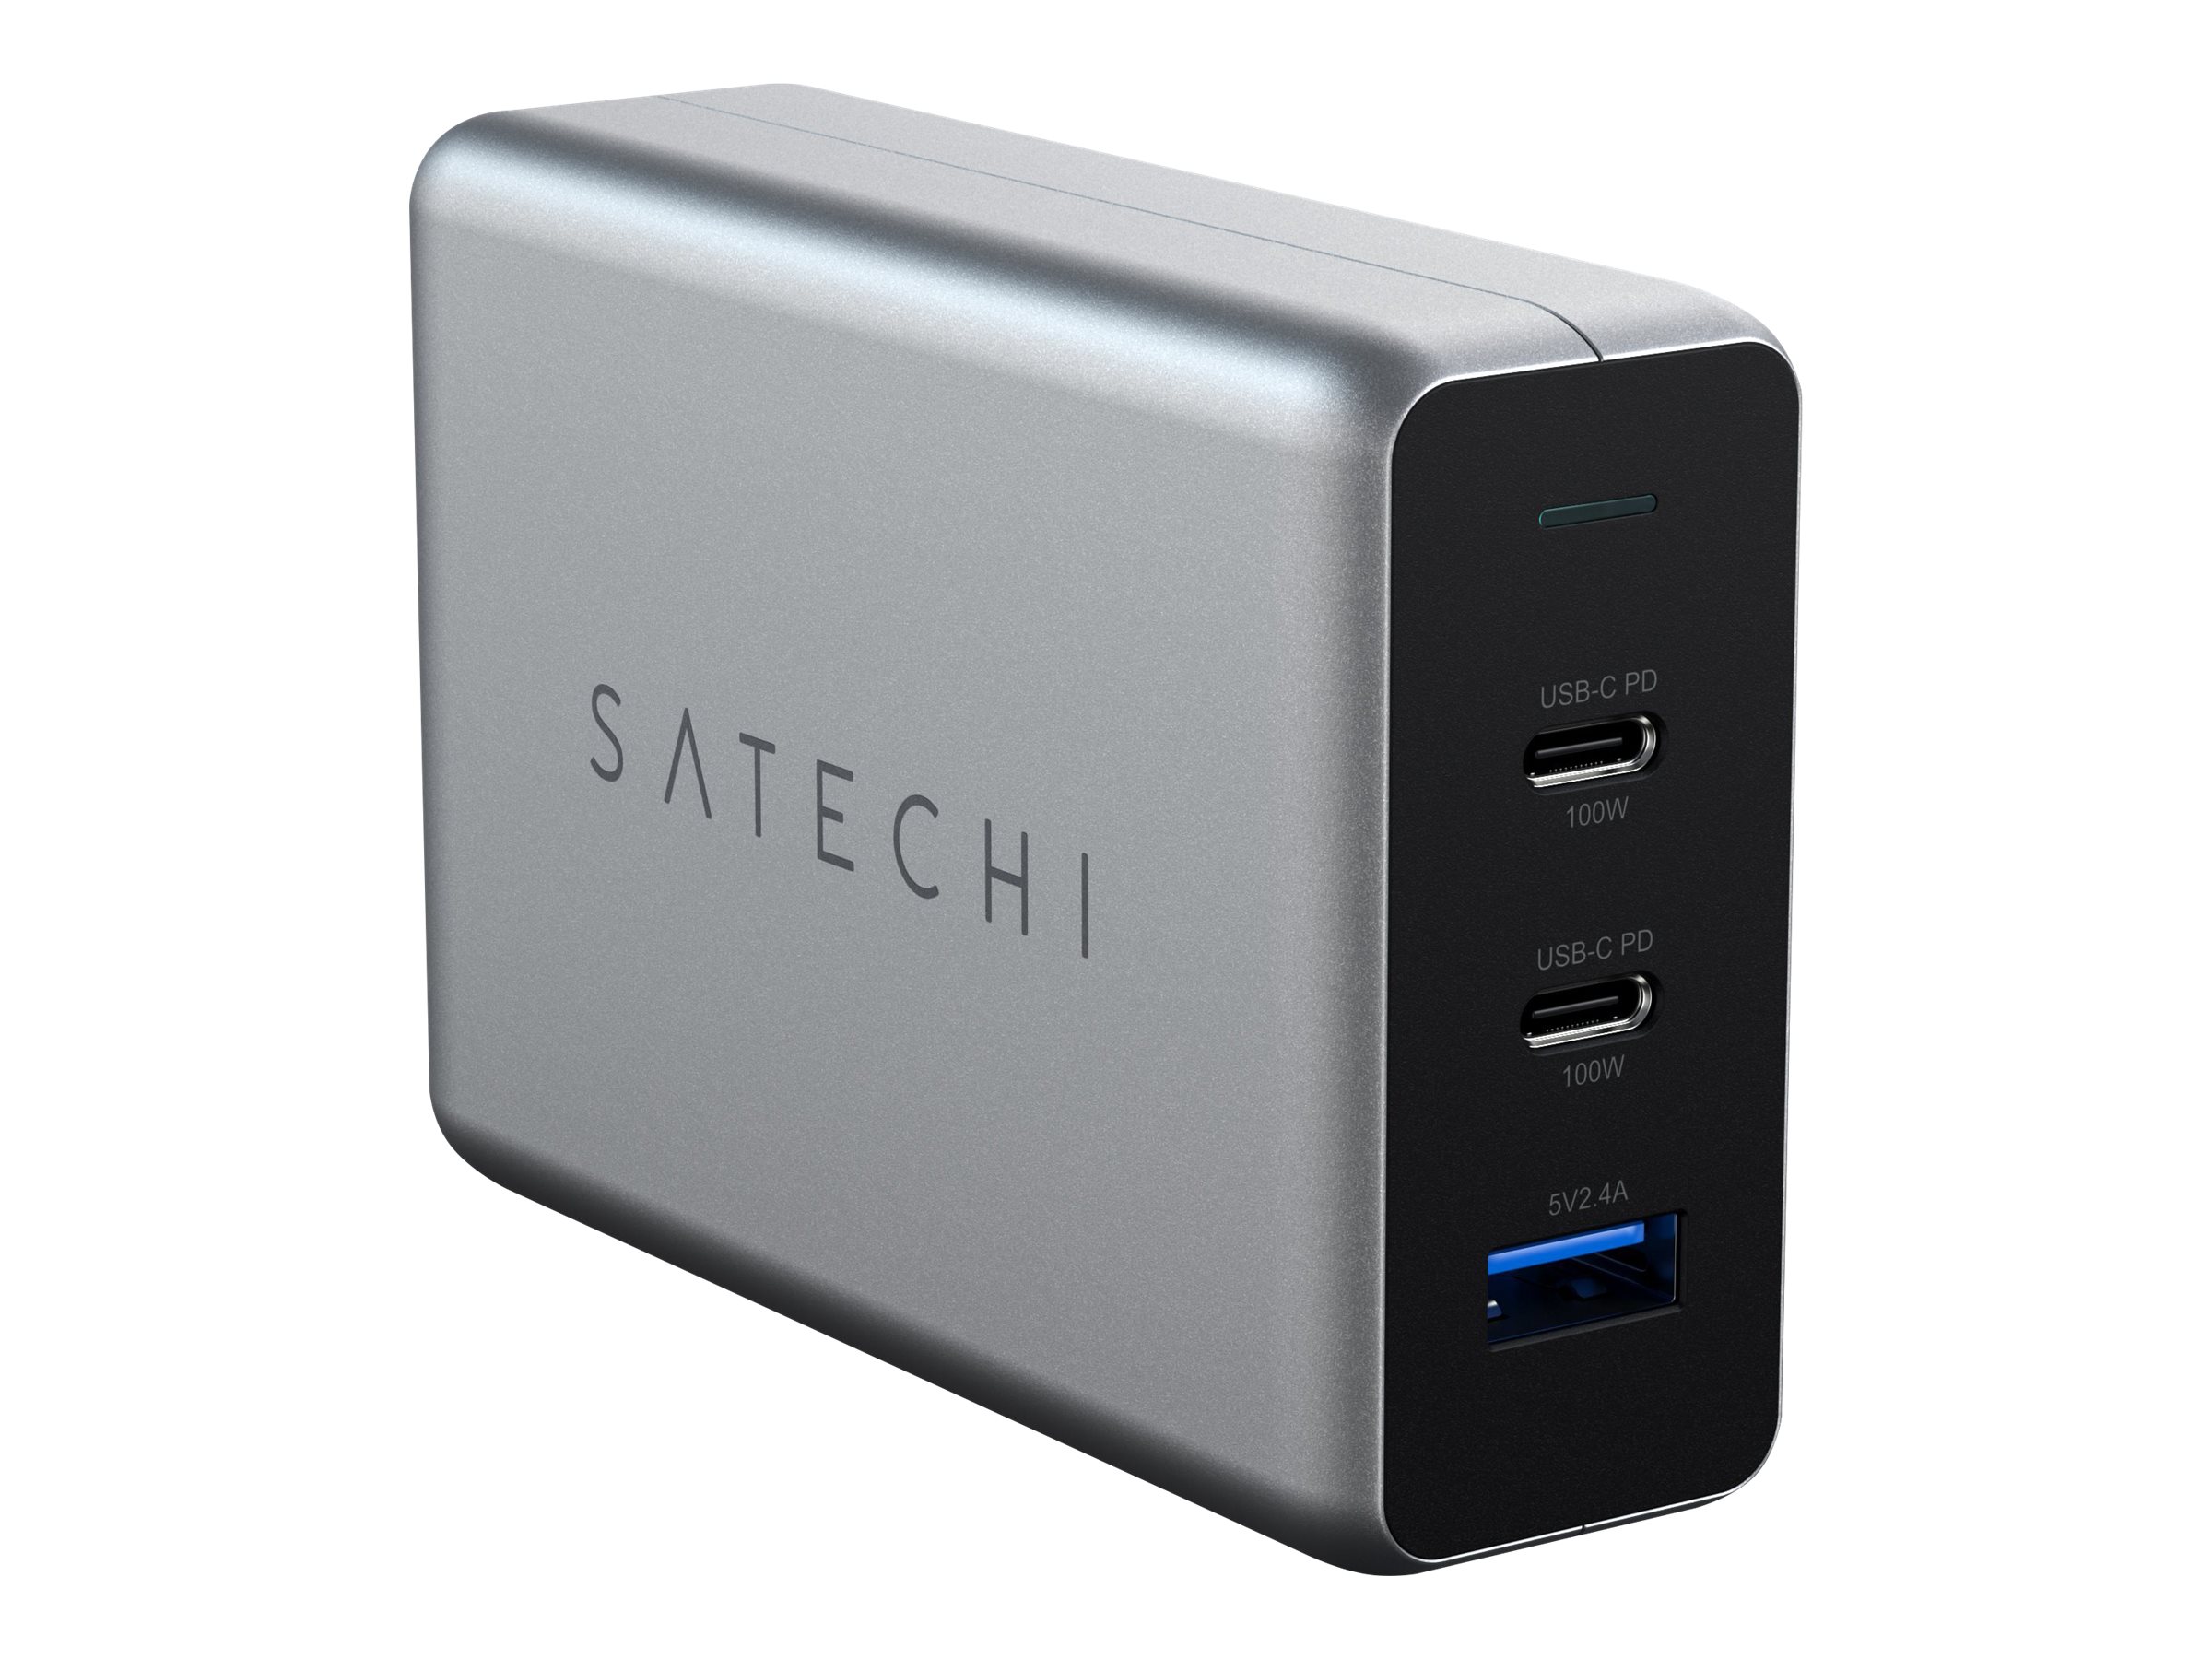 Satechi Power Adapter - Fast Charger - USB and USB-C with Power Delivery - 100 Watt - Black/Grey - STTC100GM